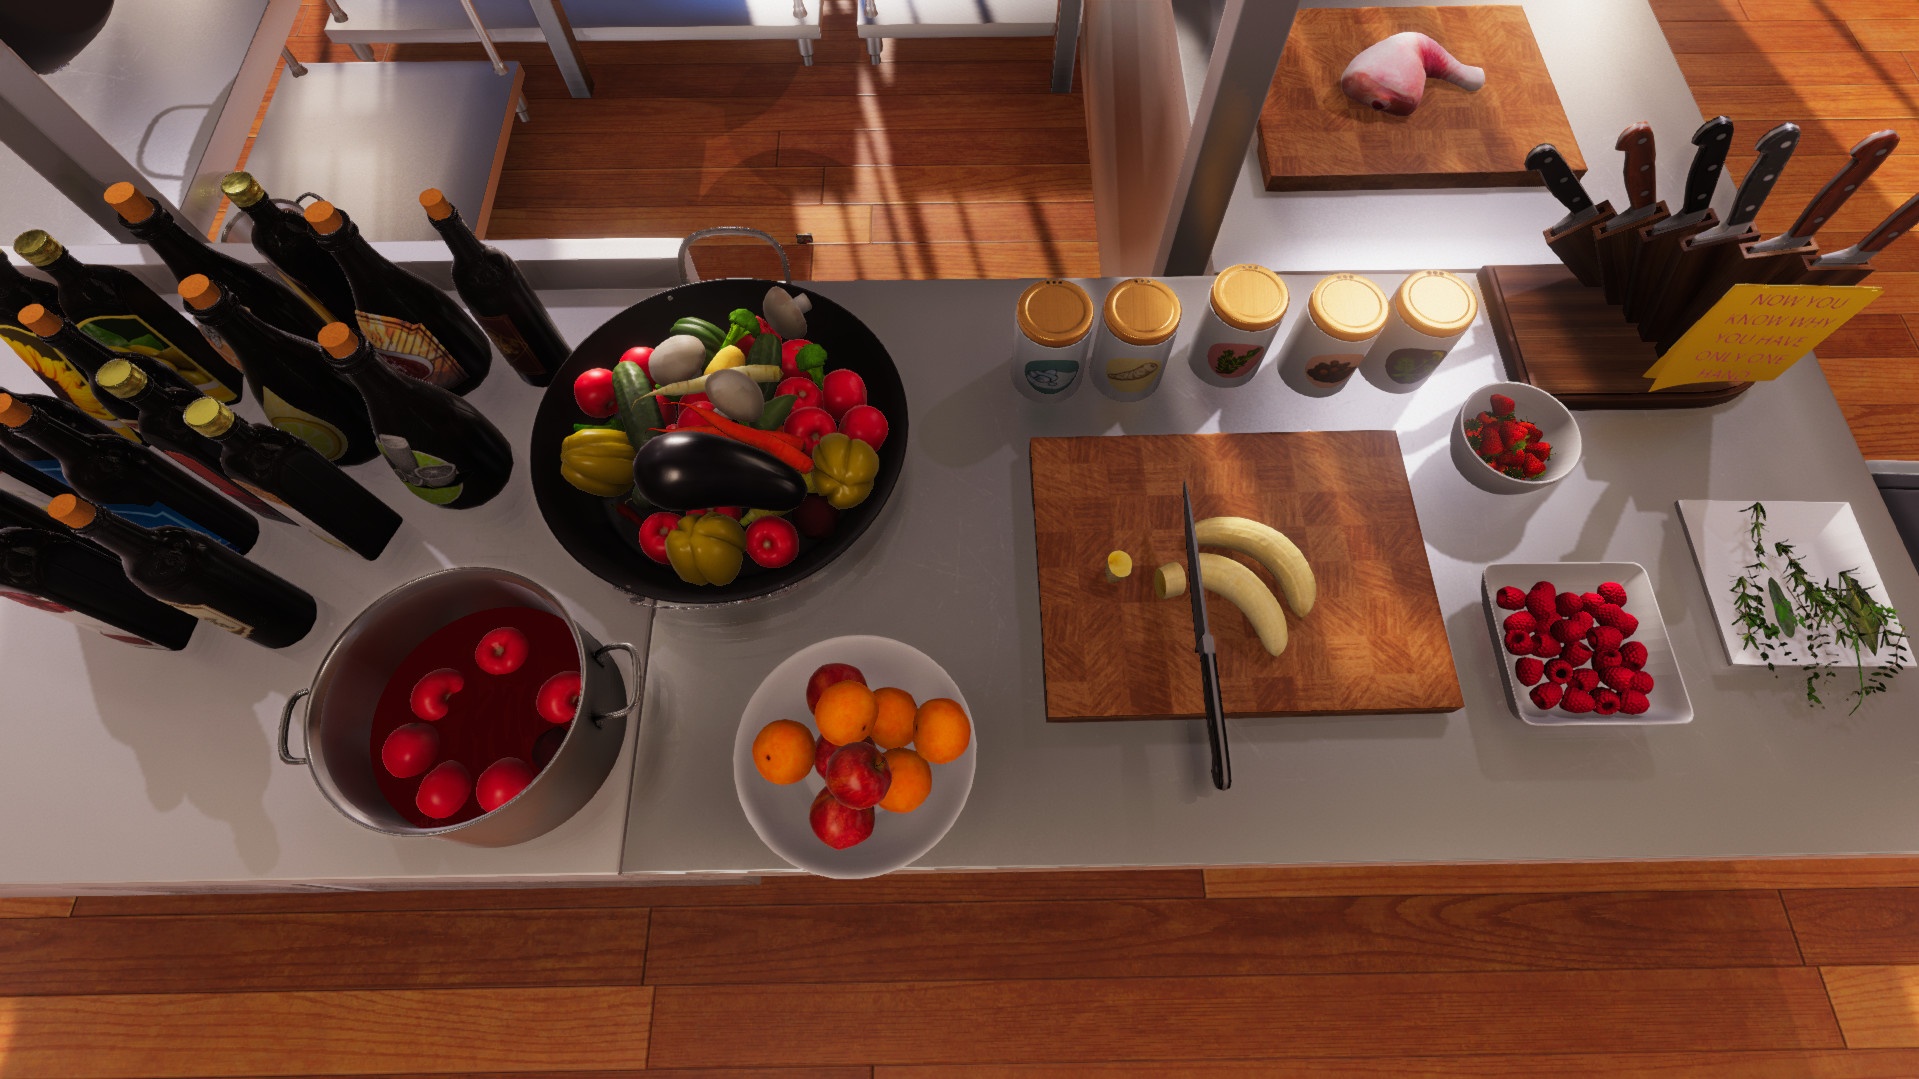 Cooking Simulator Review - Hellish kitchen